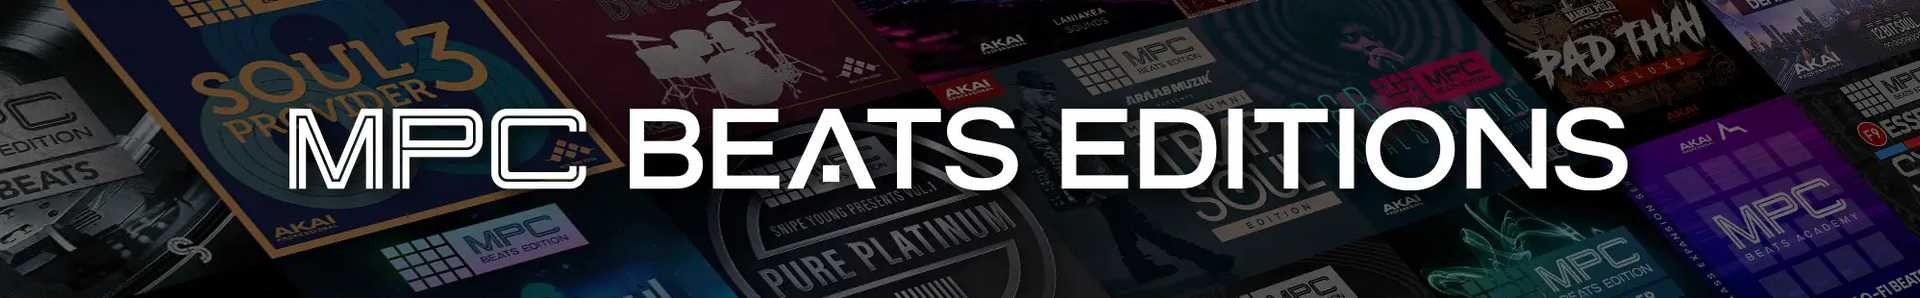 MPC Beats Editions - Array of packs in dark background with white text in foreground